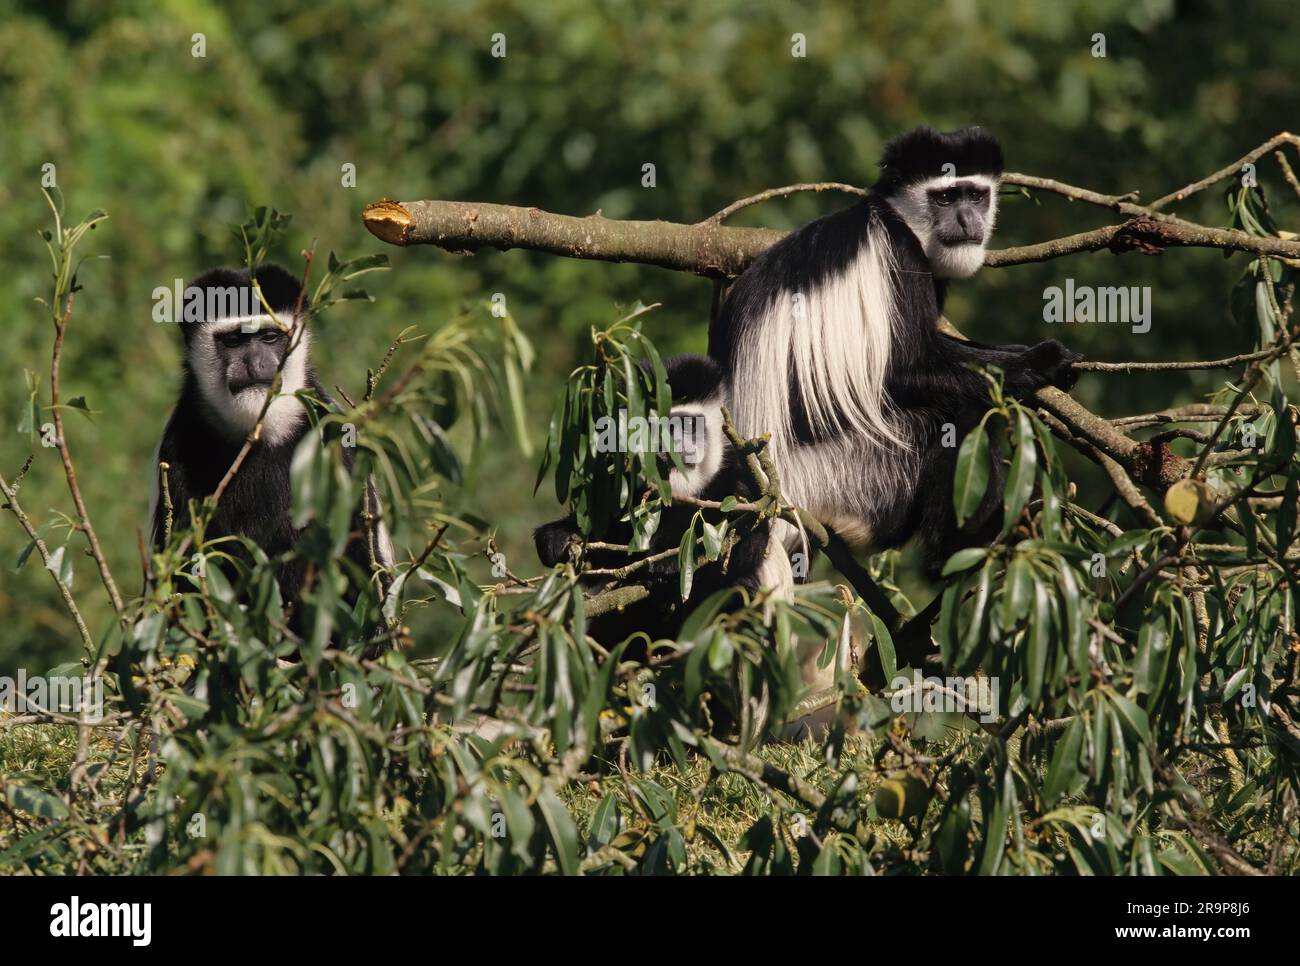 The Angola colobus (Colobus angolensis), Angolan black-and-white colobus, or Angolan colobus is a primate species of Old World monkey belonging to the Stock Photo